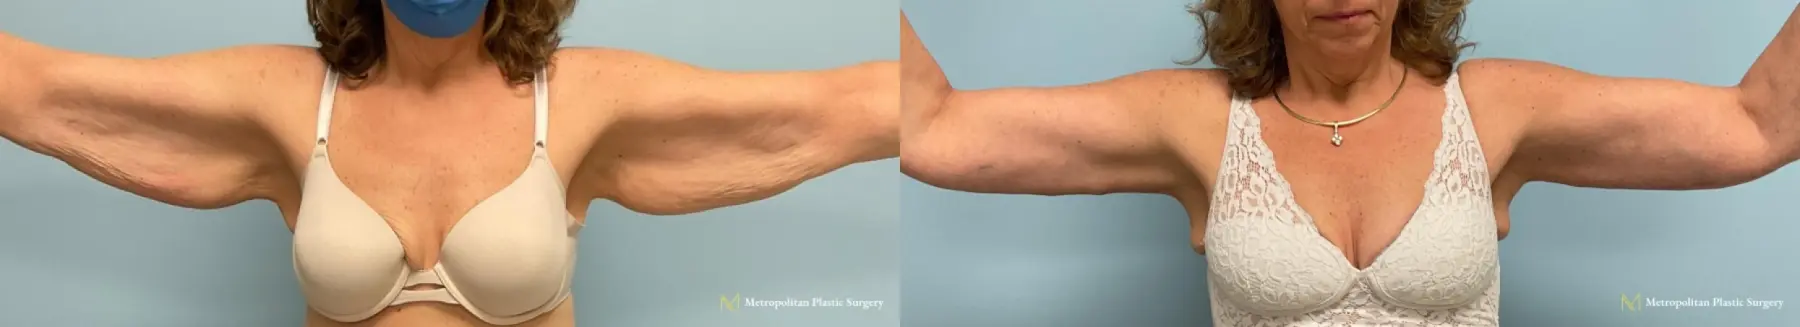 Remove Excess Arm skin and fat with Brachioplasty from Julia Spears MD - Before and After